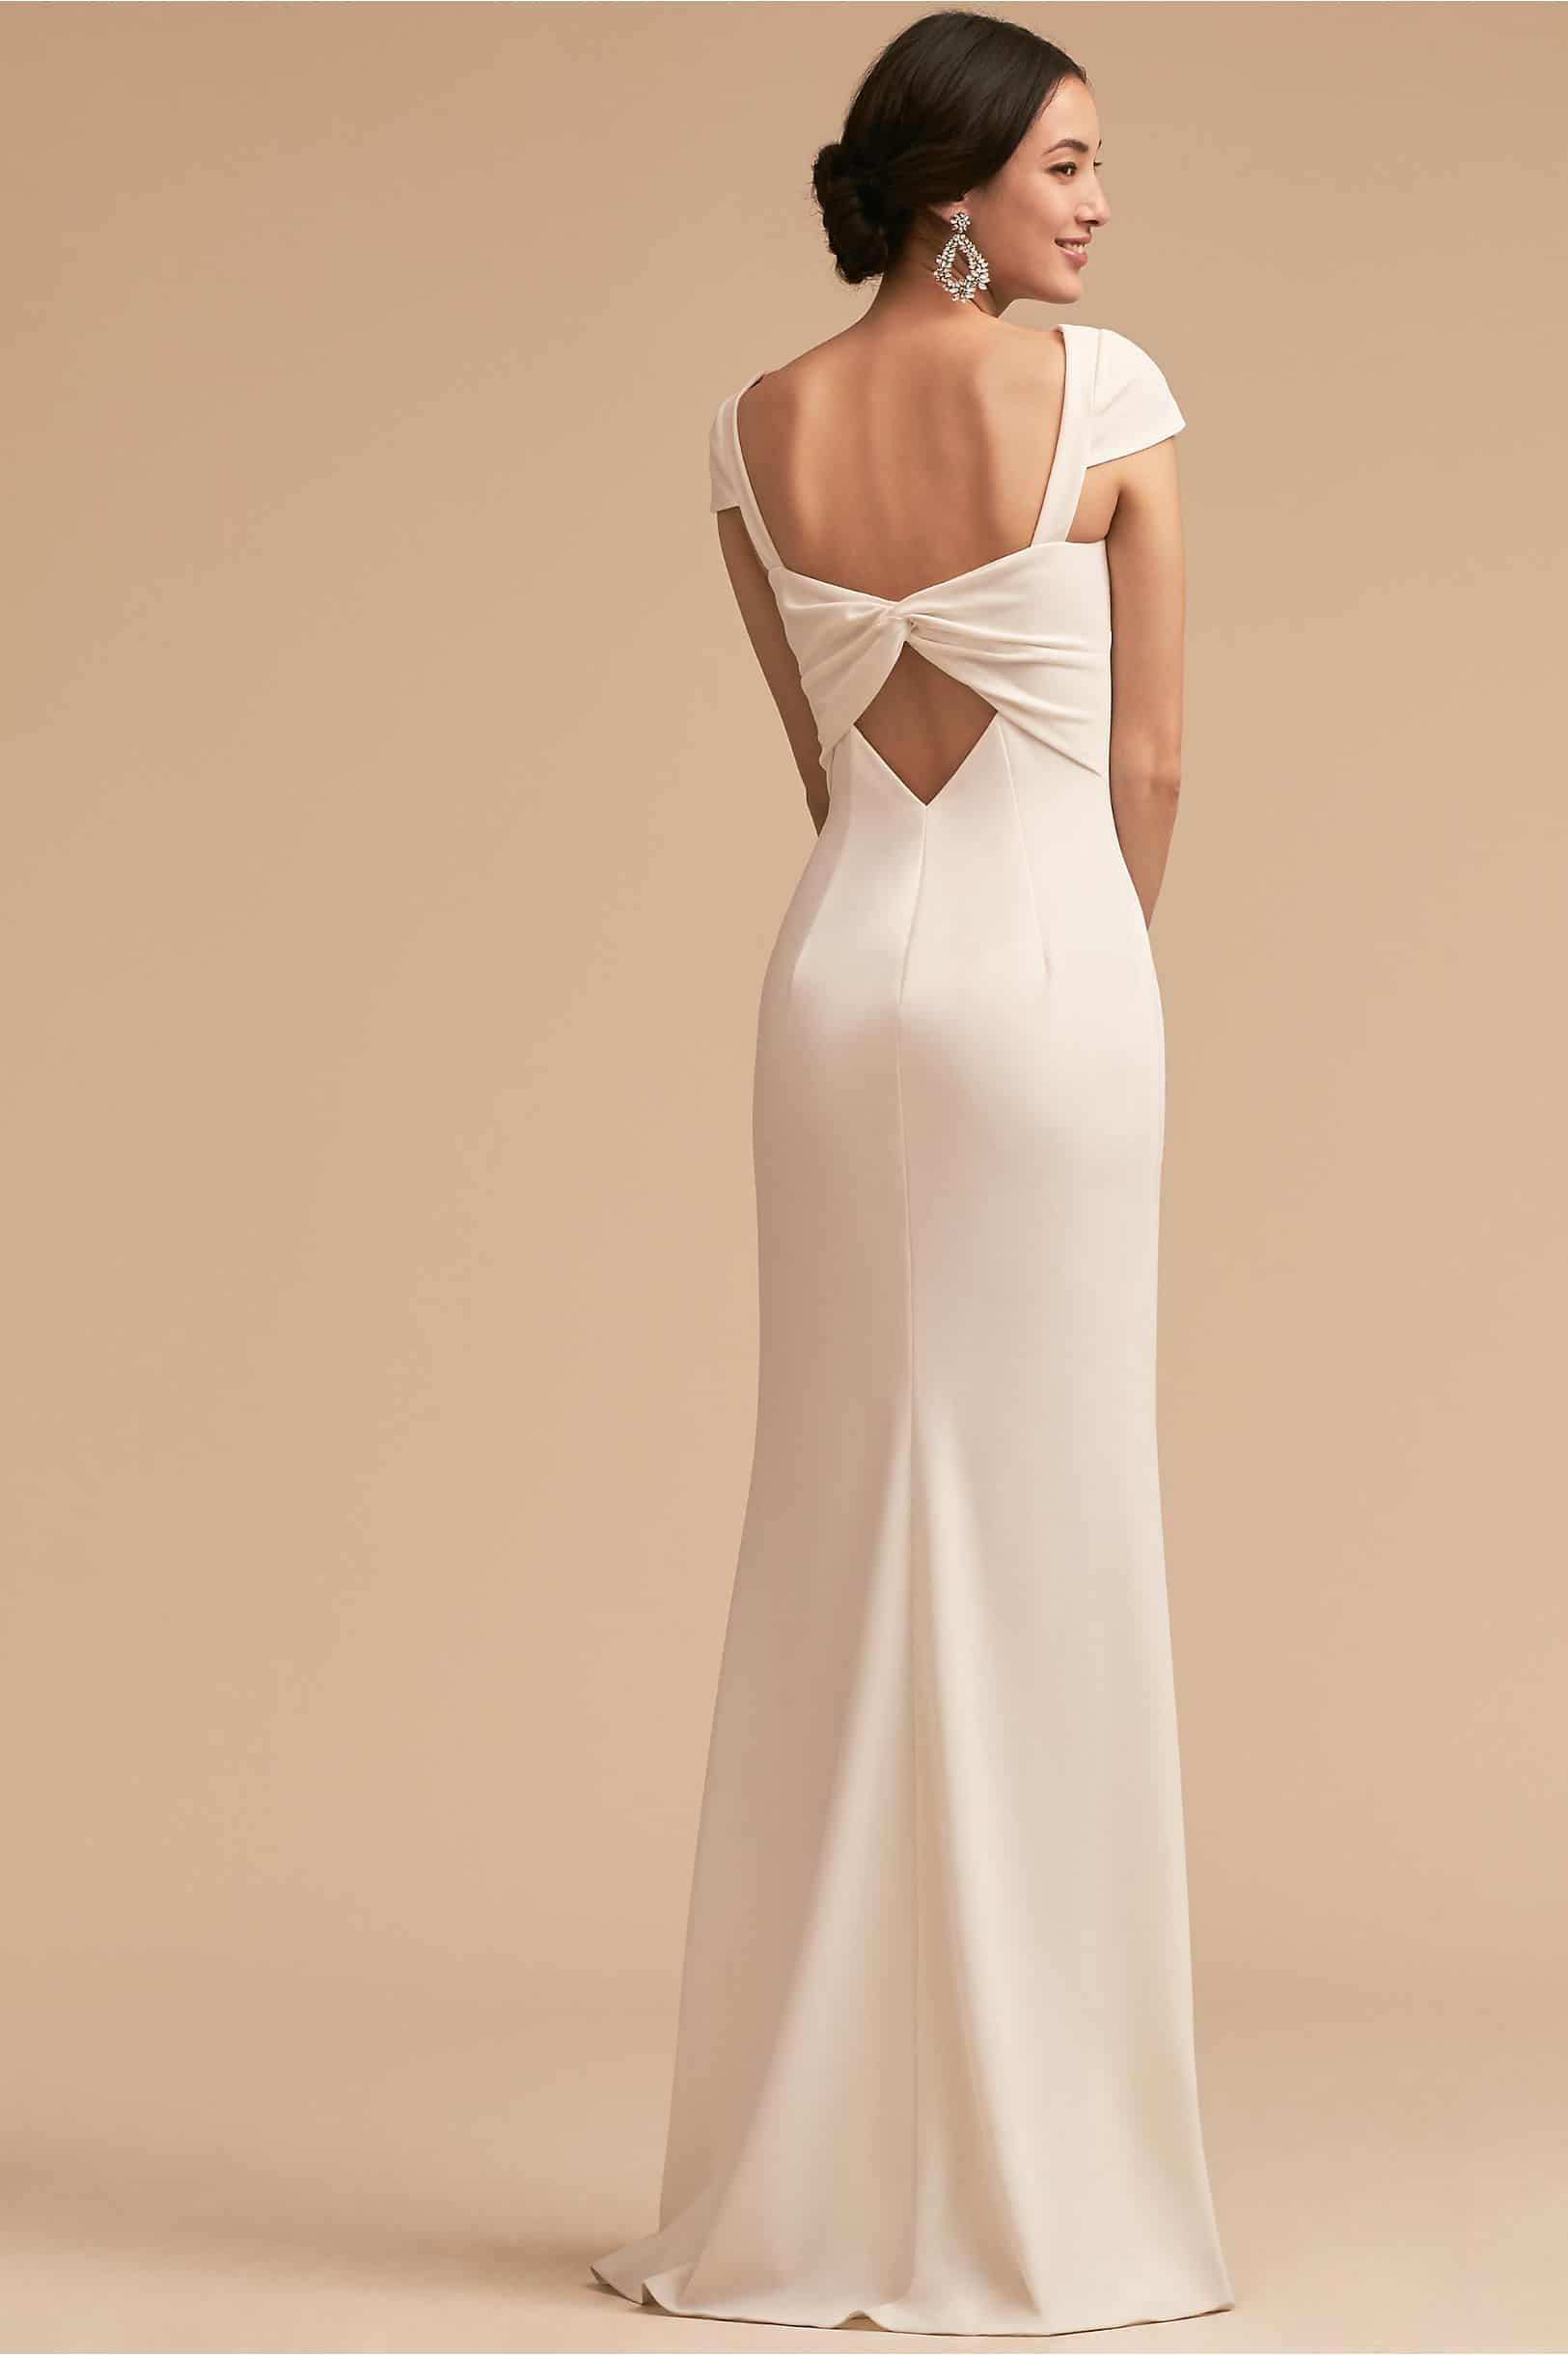 Cream, White, and Ivory Bridesmaid Dresses Dress for the Wedding